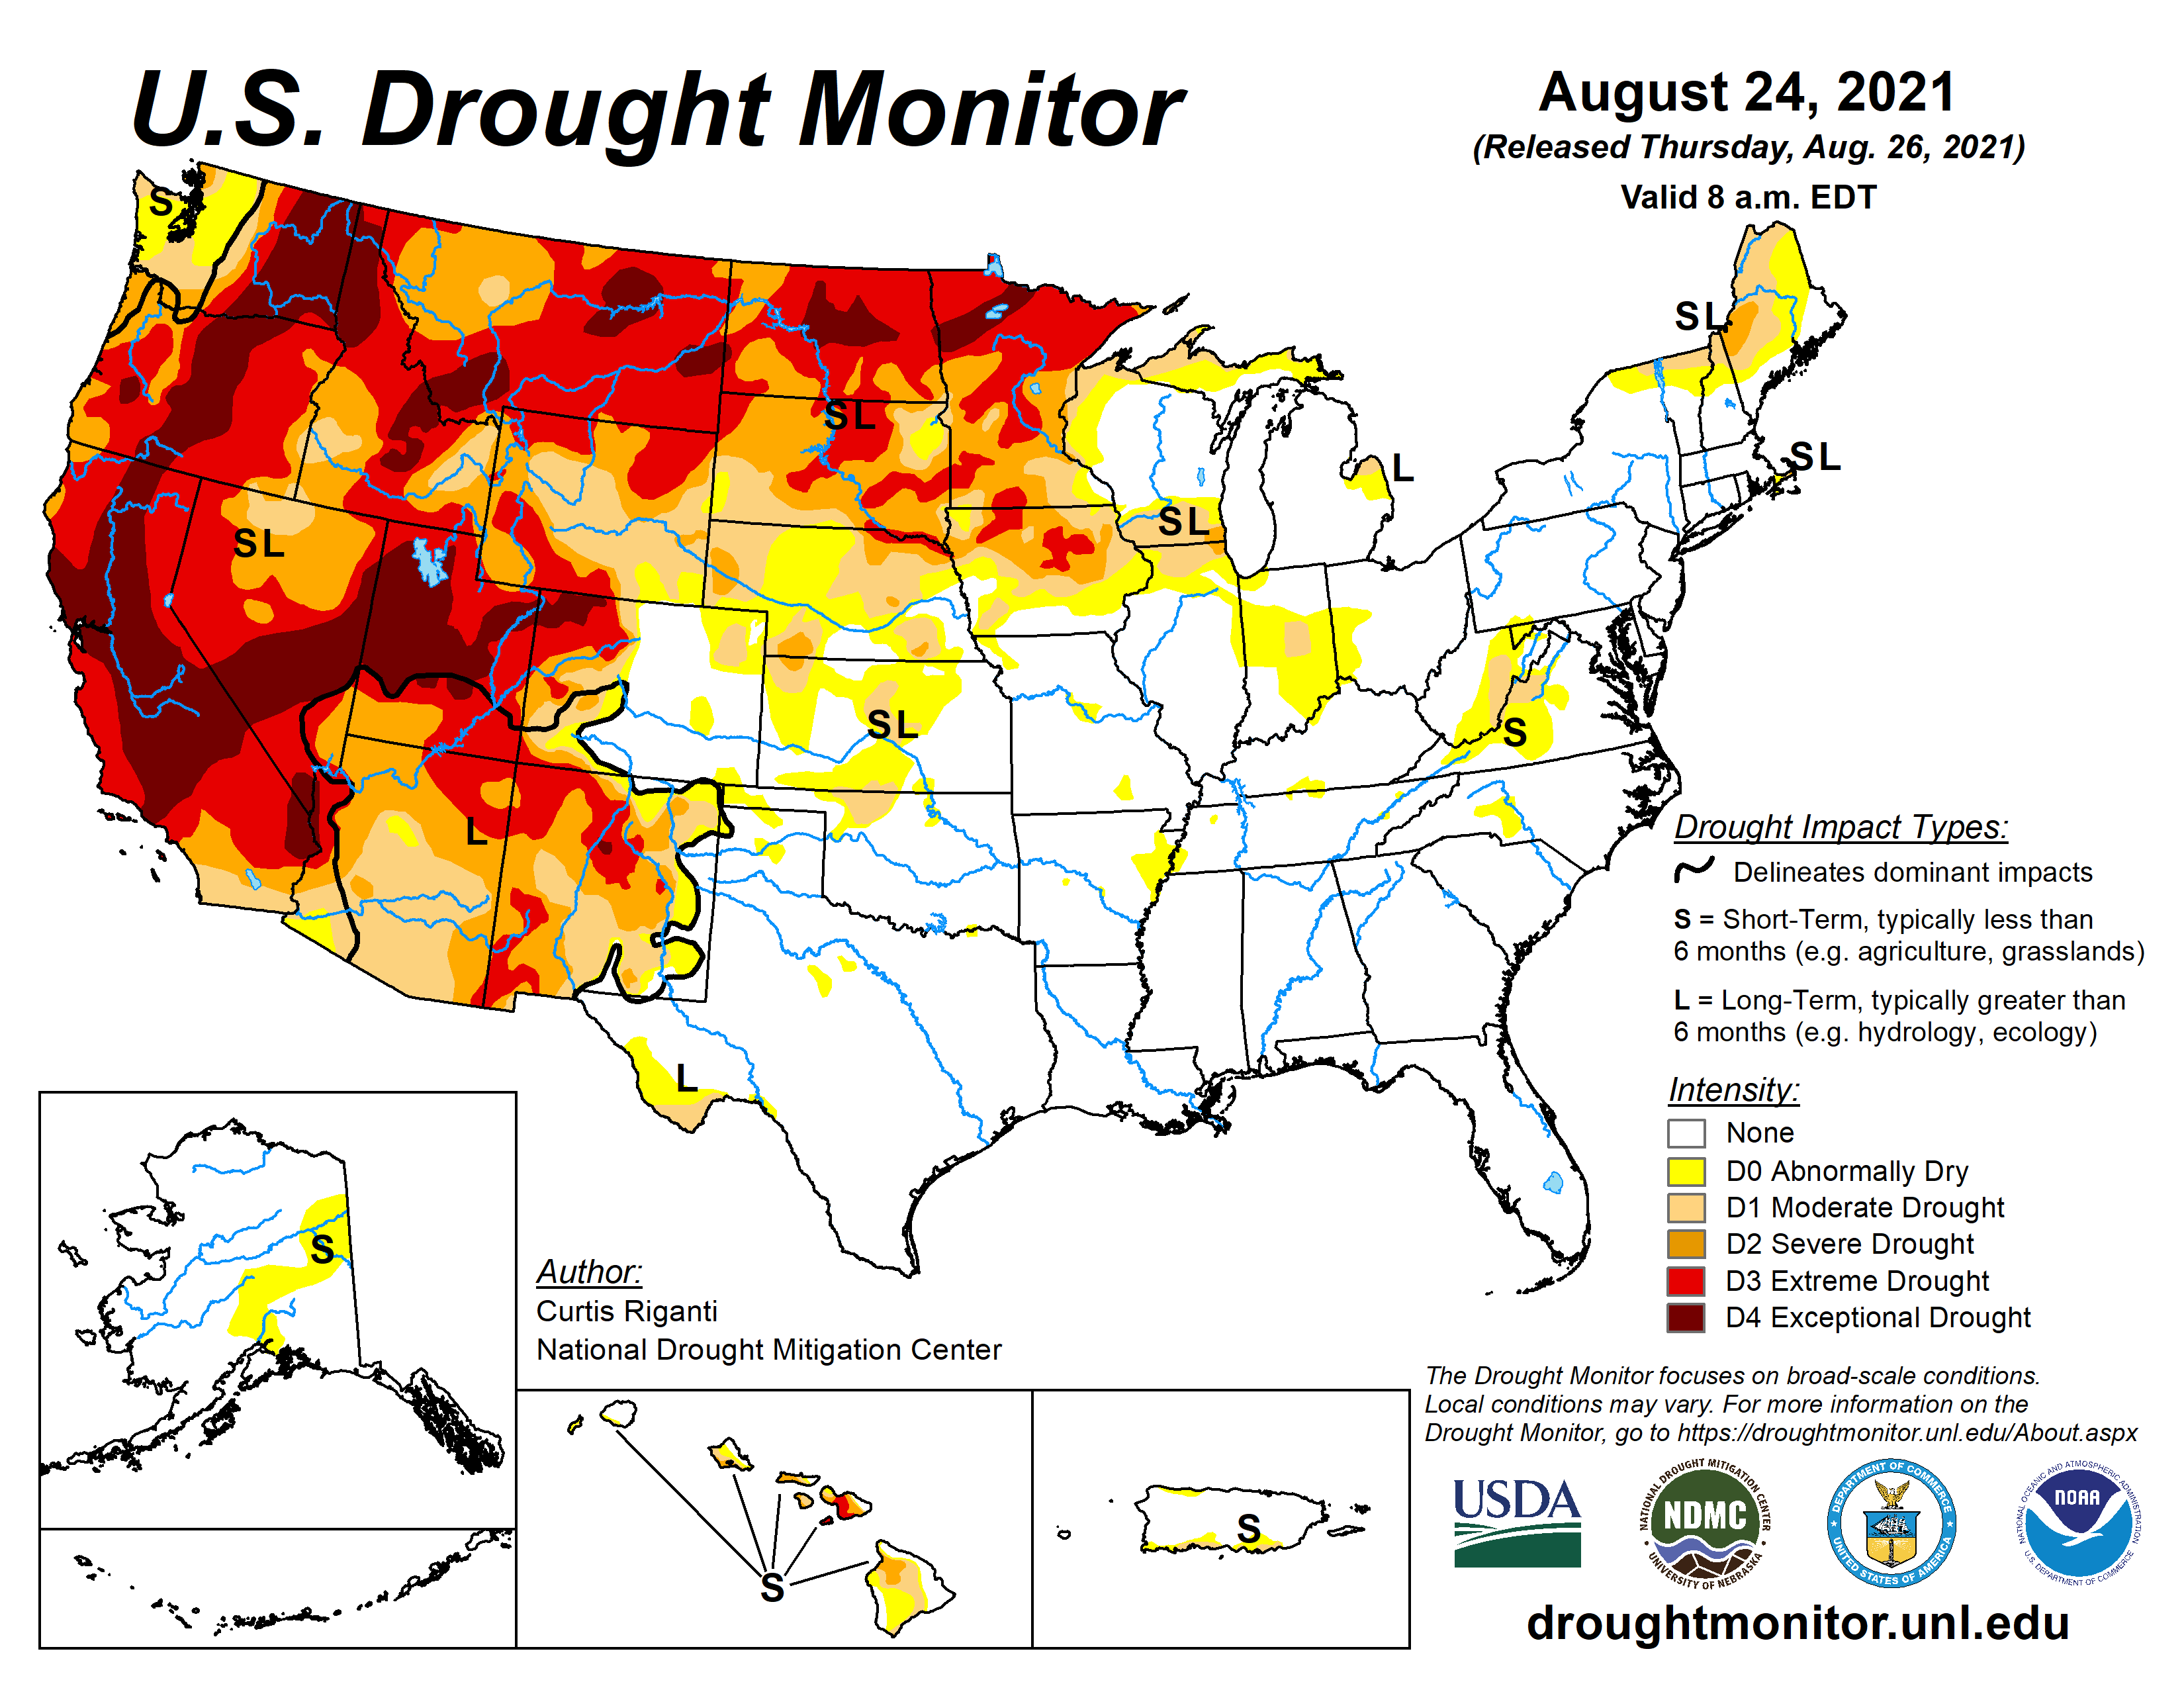 Western drought and high plains drought are a big problem.